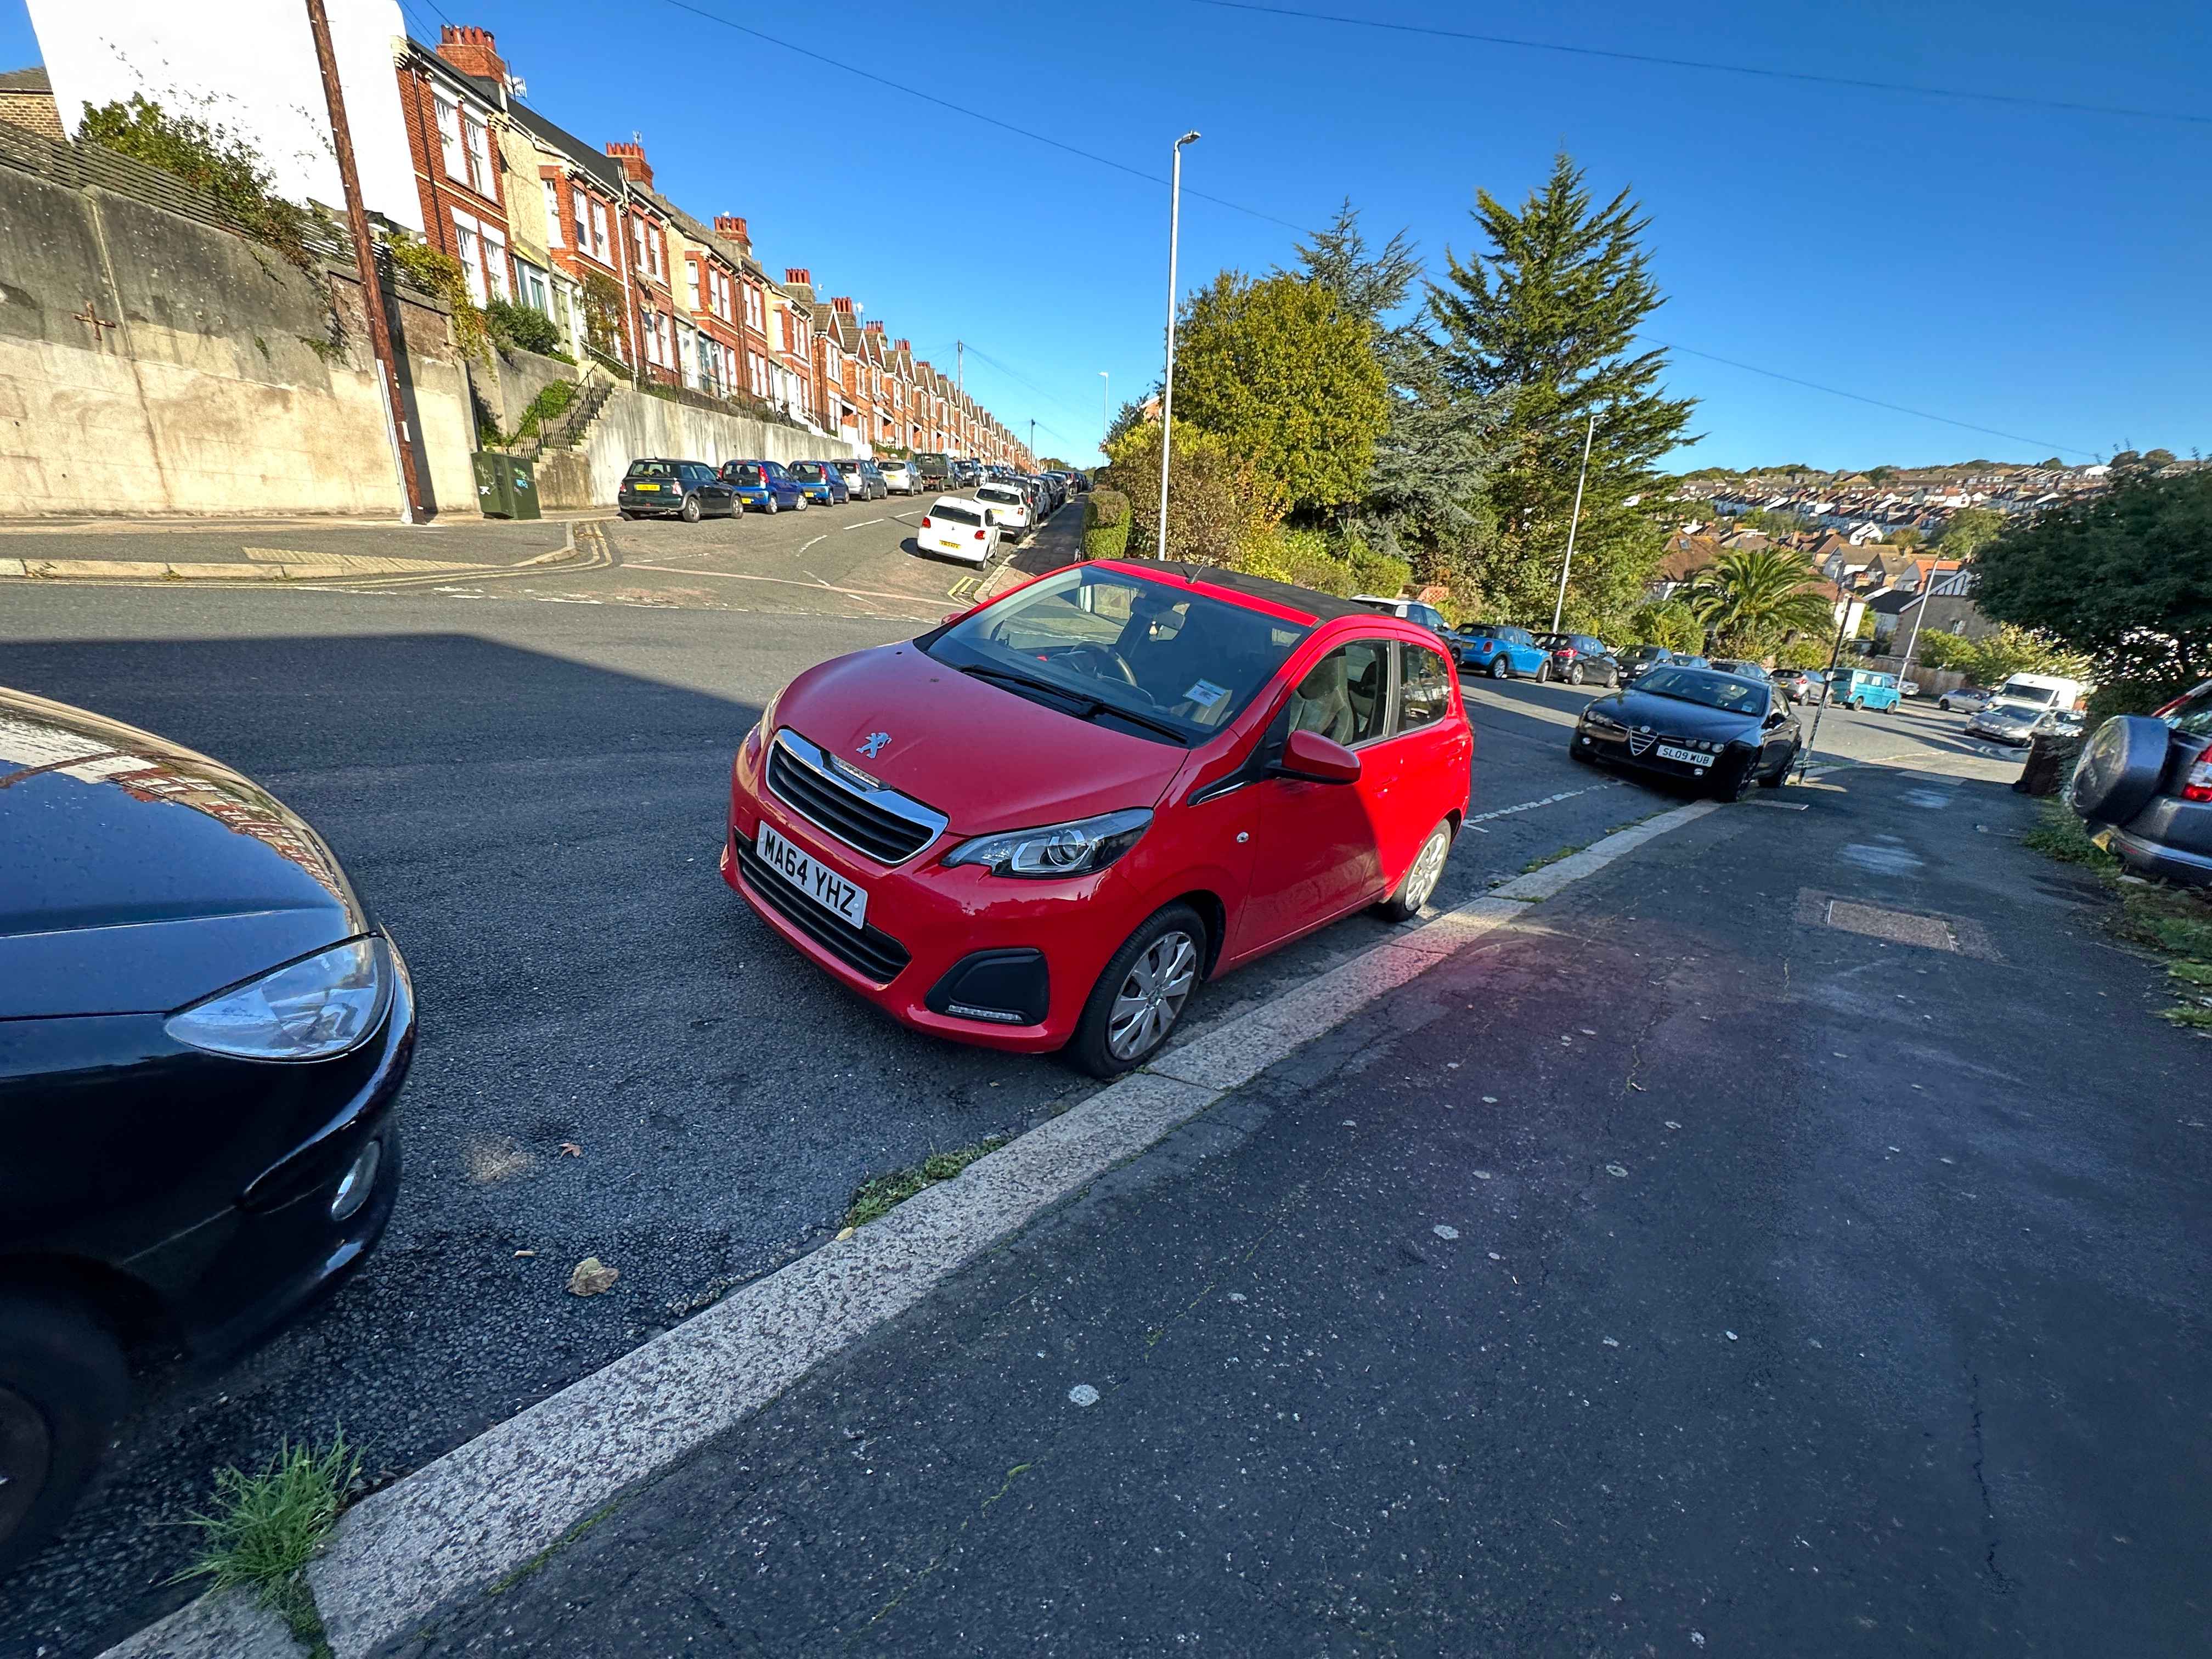 Photograph of MA64 YHZ - a Red Peugeot 108 parked in Hollingdean by a non-resident who uses the local area as part of their Brighton commute. The second of four photographs supplied by the residents of Hollingdean.